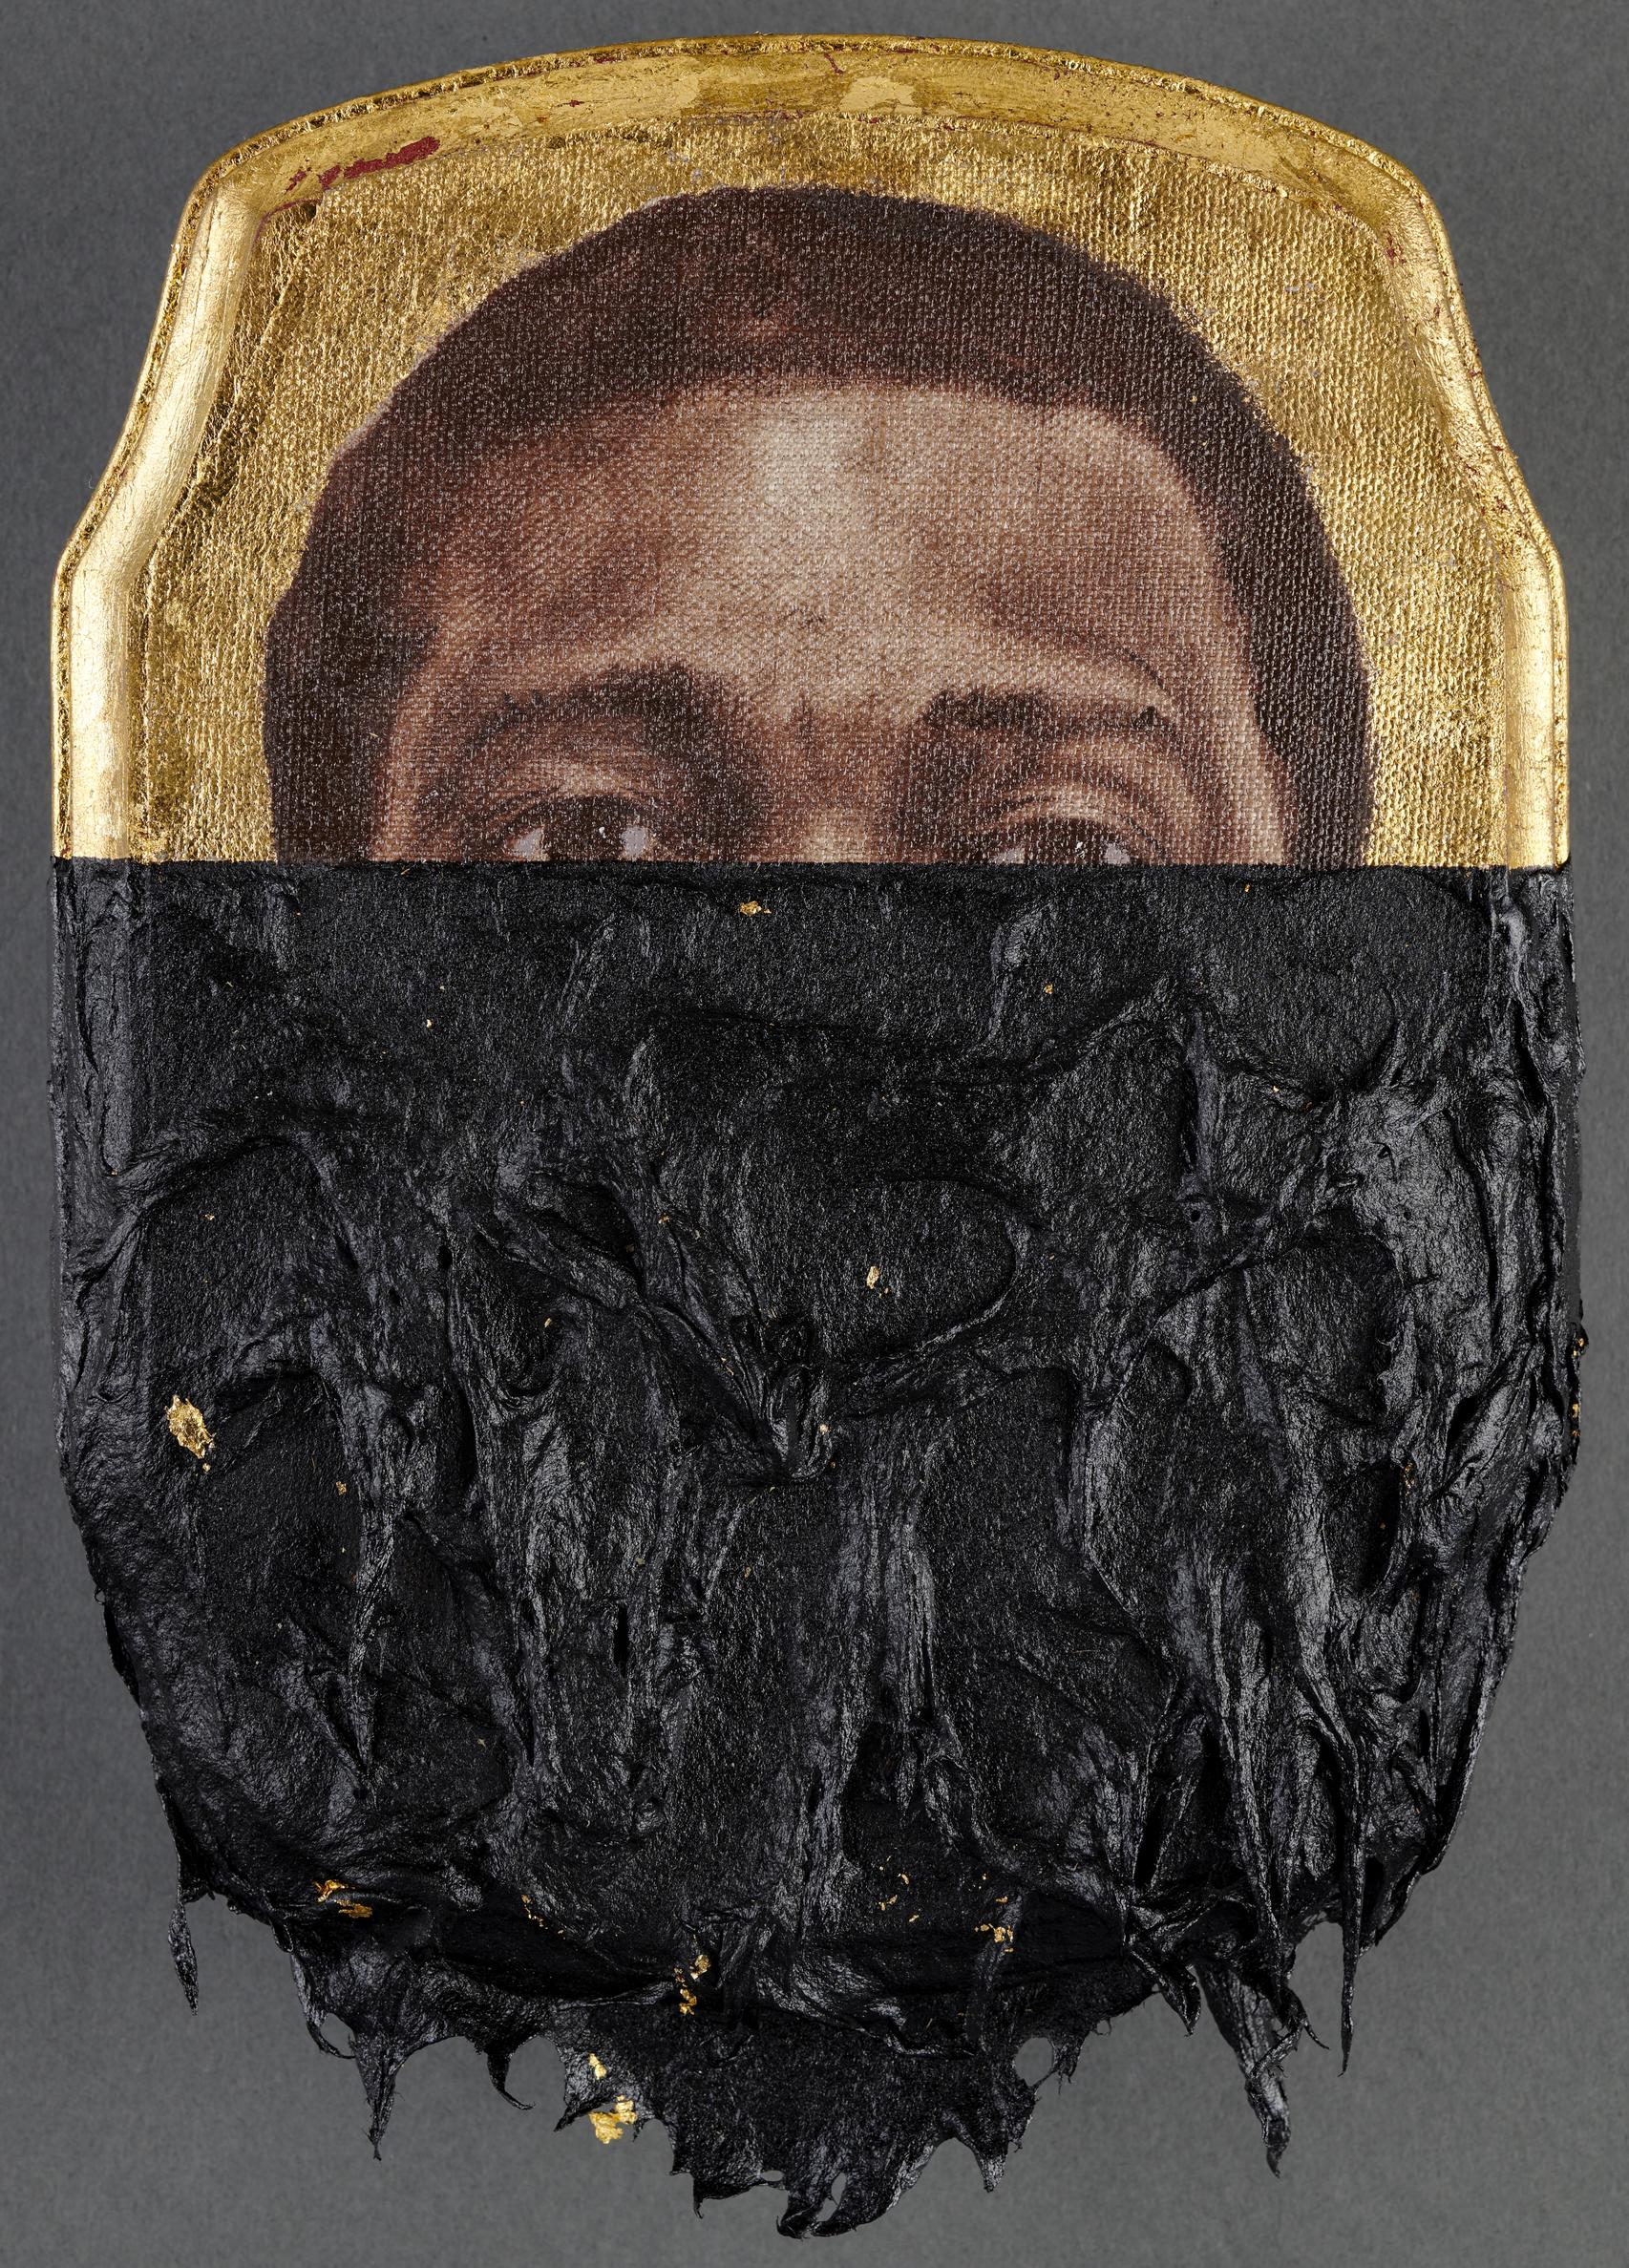 Titus Kaphar, Jerome XXVIII, 2014. Oil, tar, and gold leaf on panel. 25.4 x 17.8 x 2.5 cm (10 x 7 x 1 in.). Collection of Lonti Ebers. 